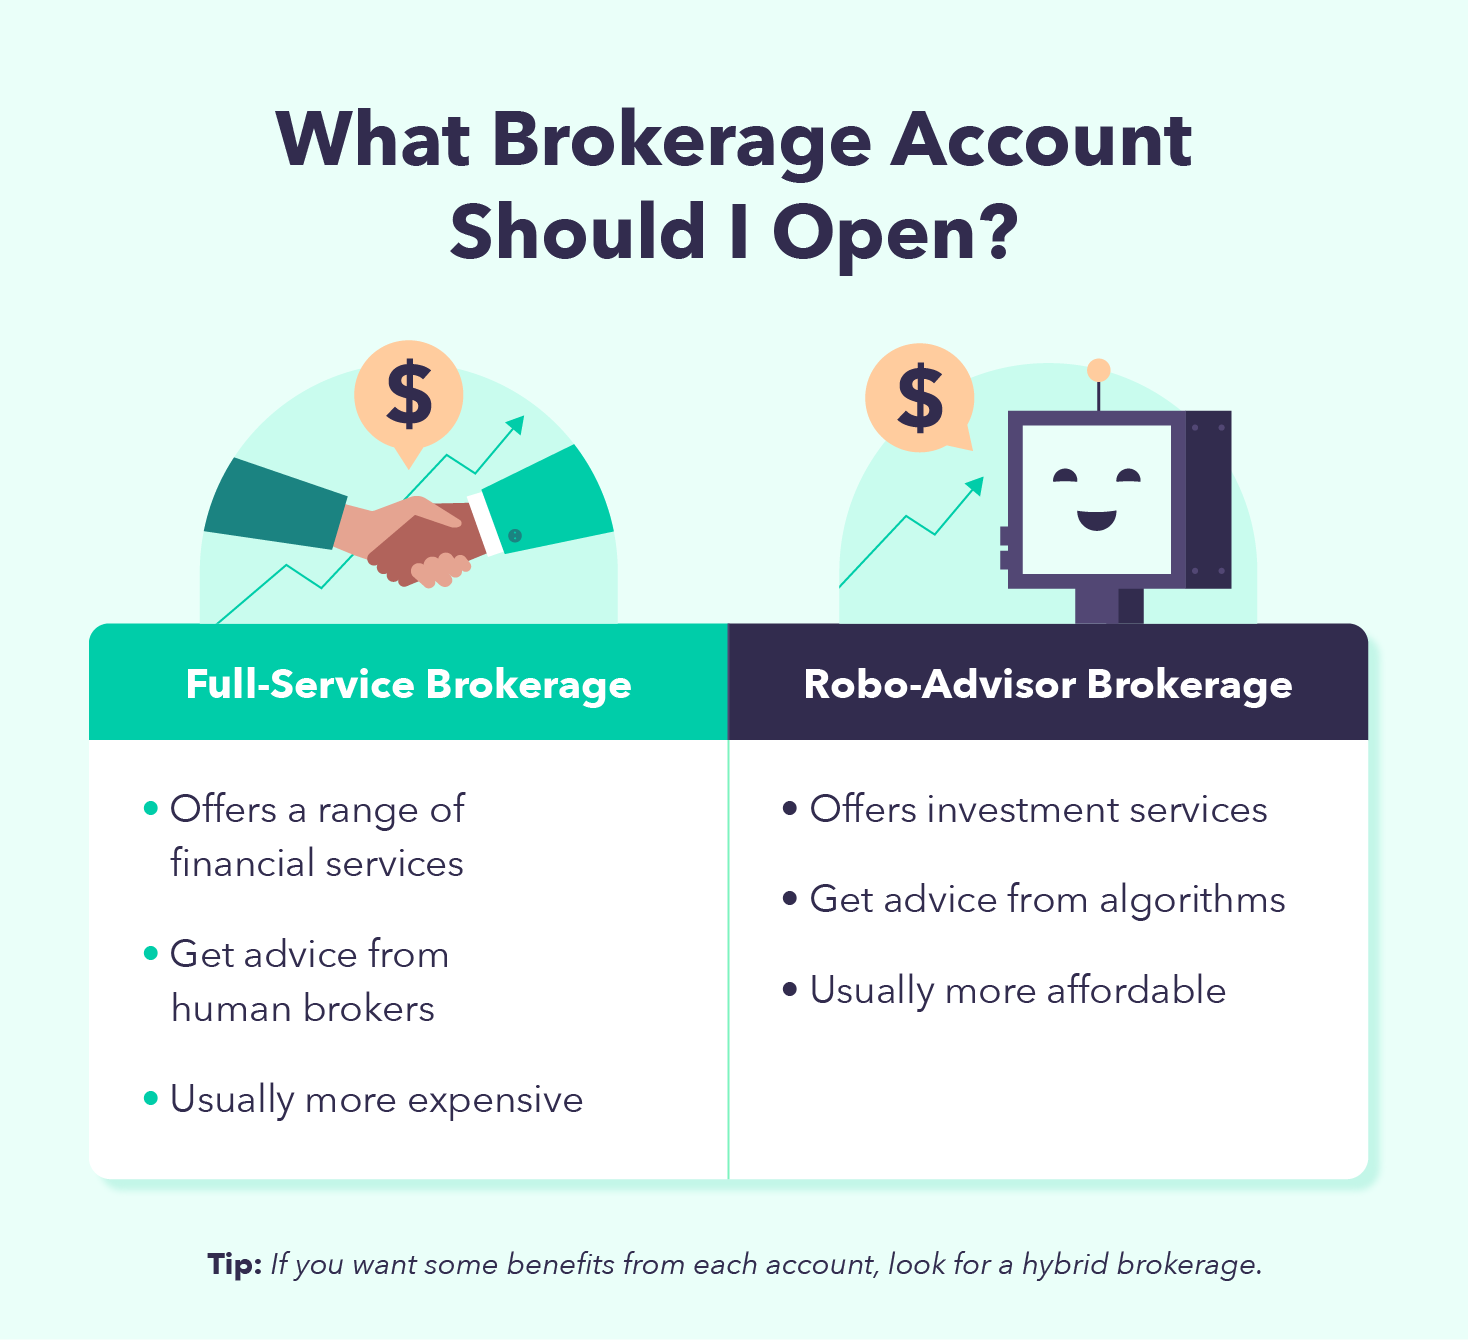 A table compares full-service brokerages to robo-advisor brokerages. 